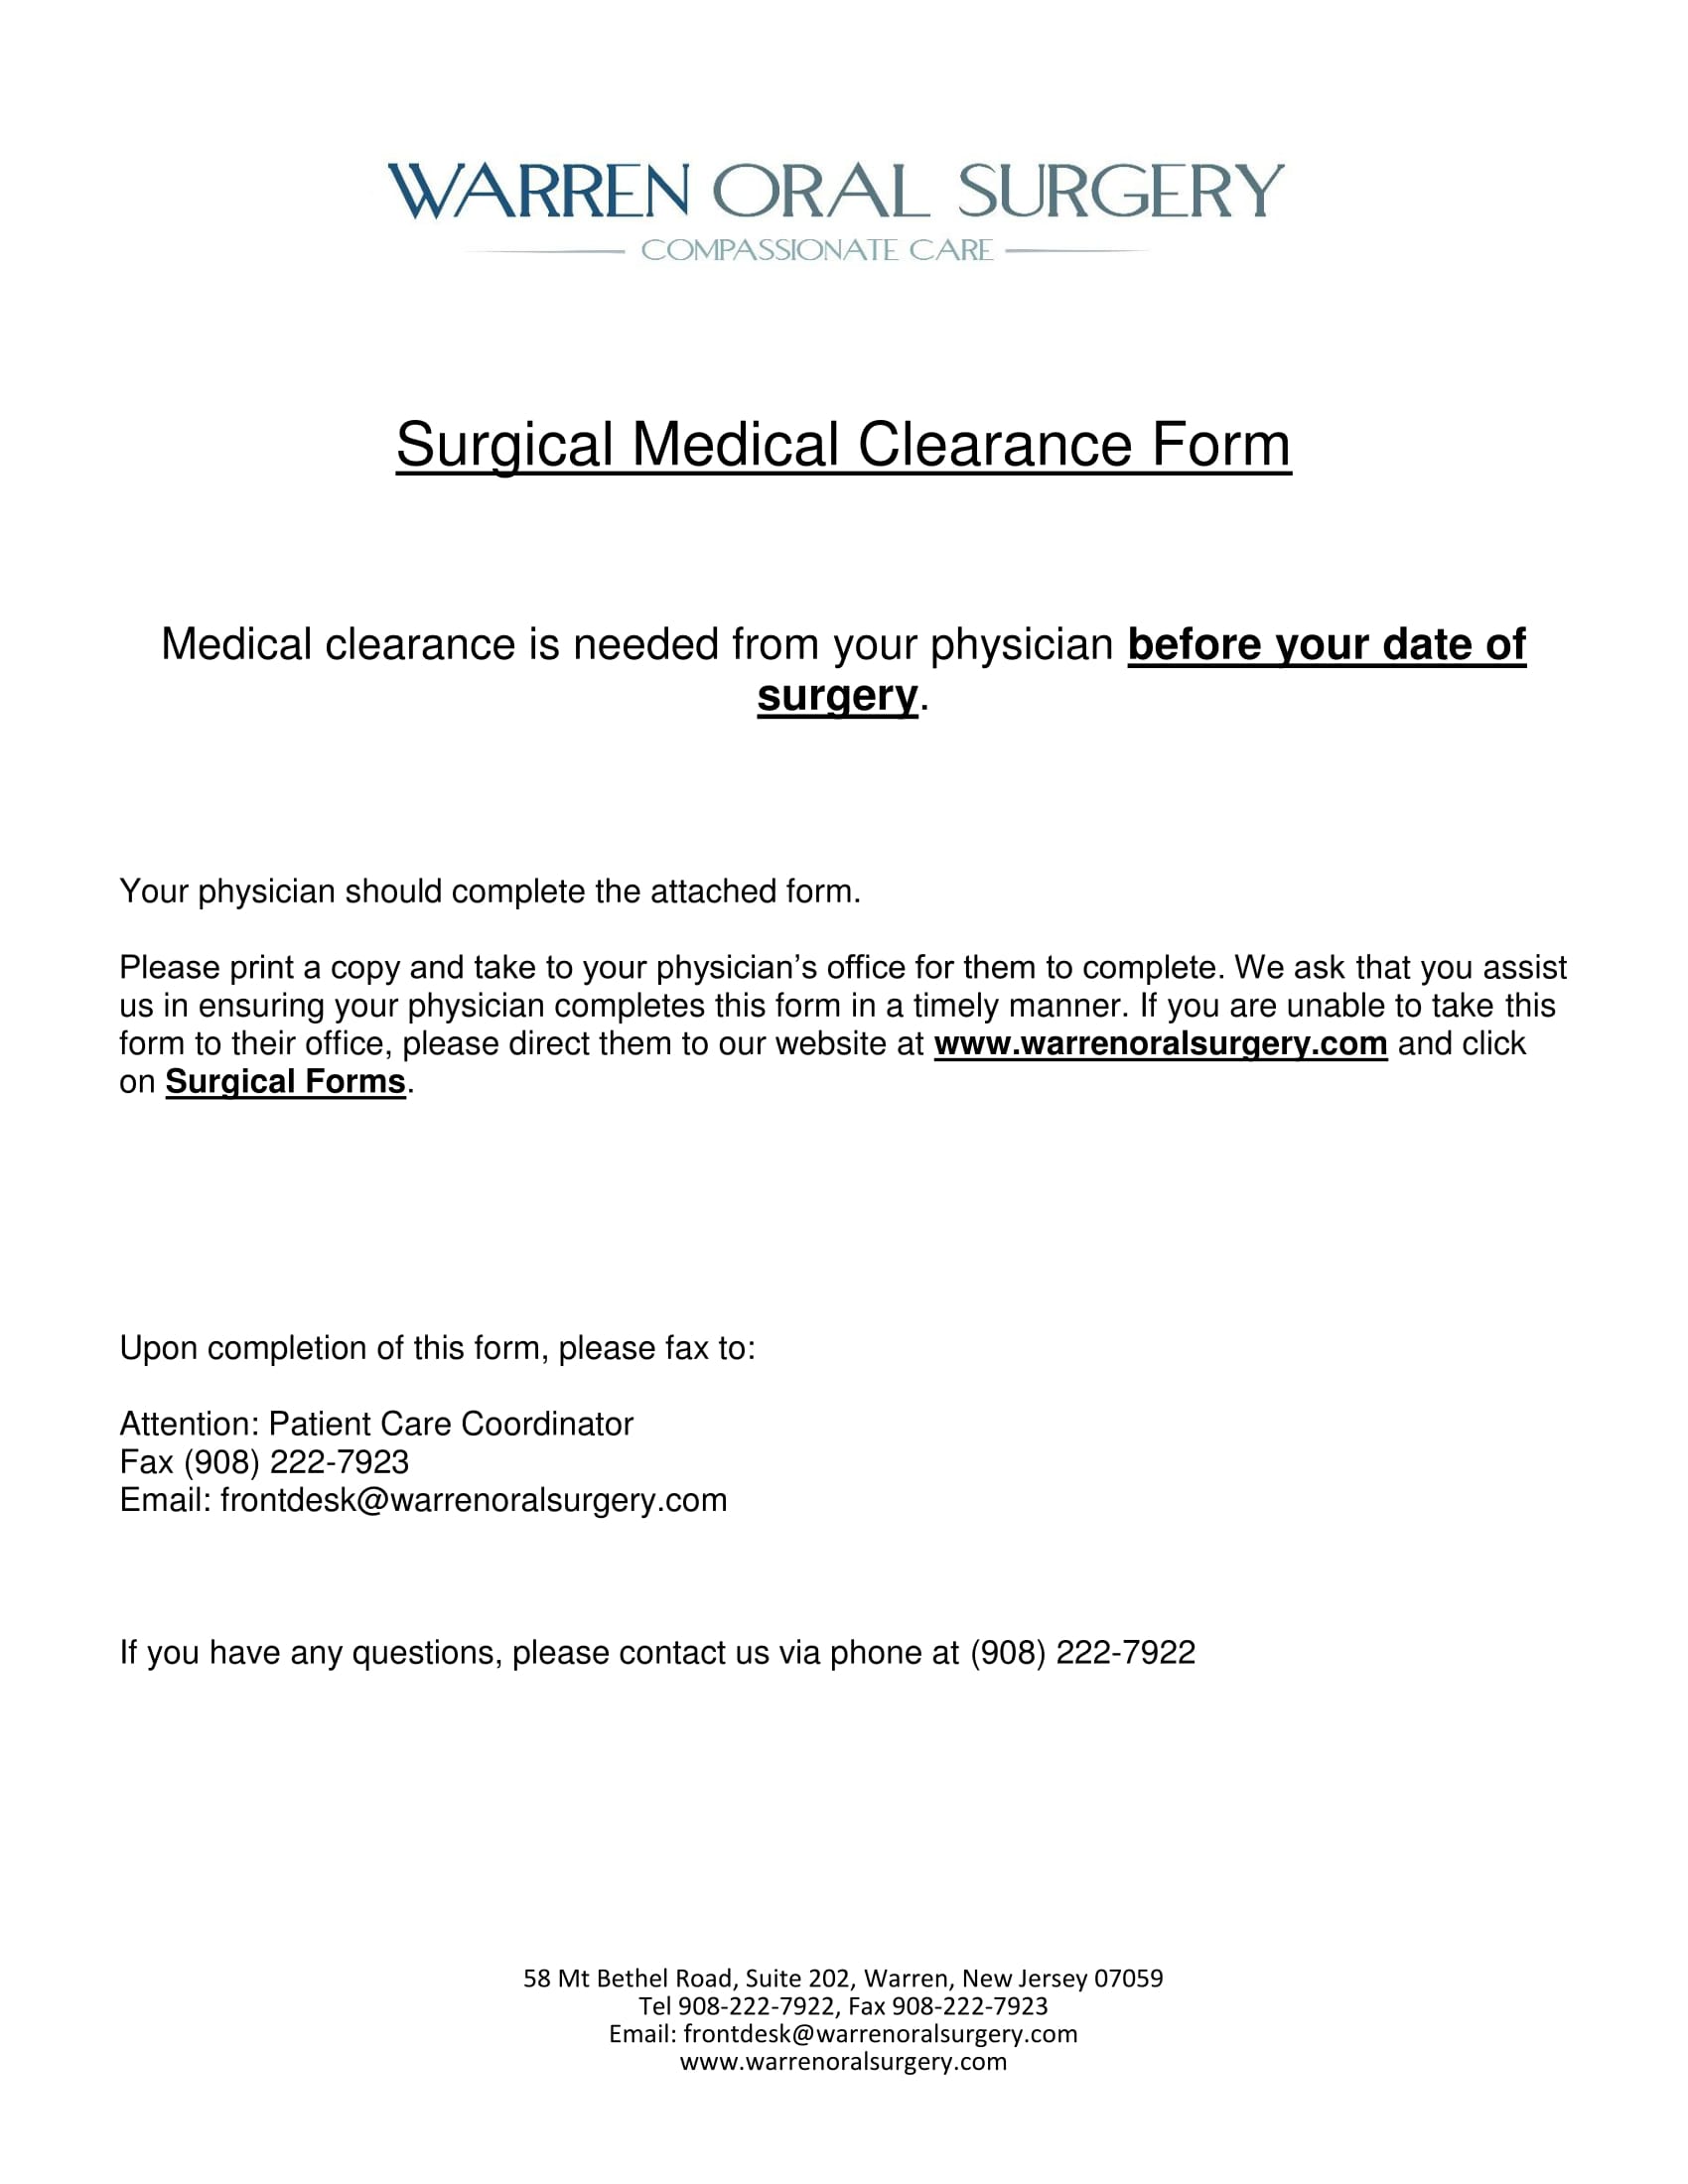 surgical medical clearance form 1